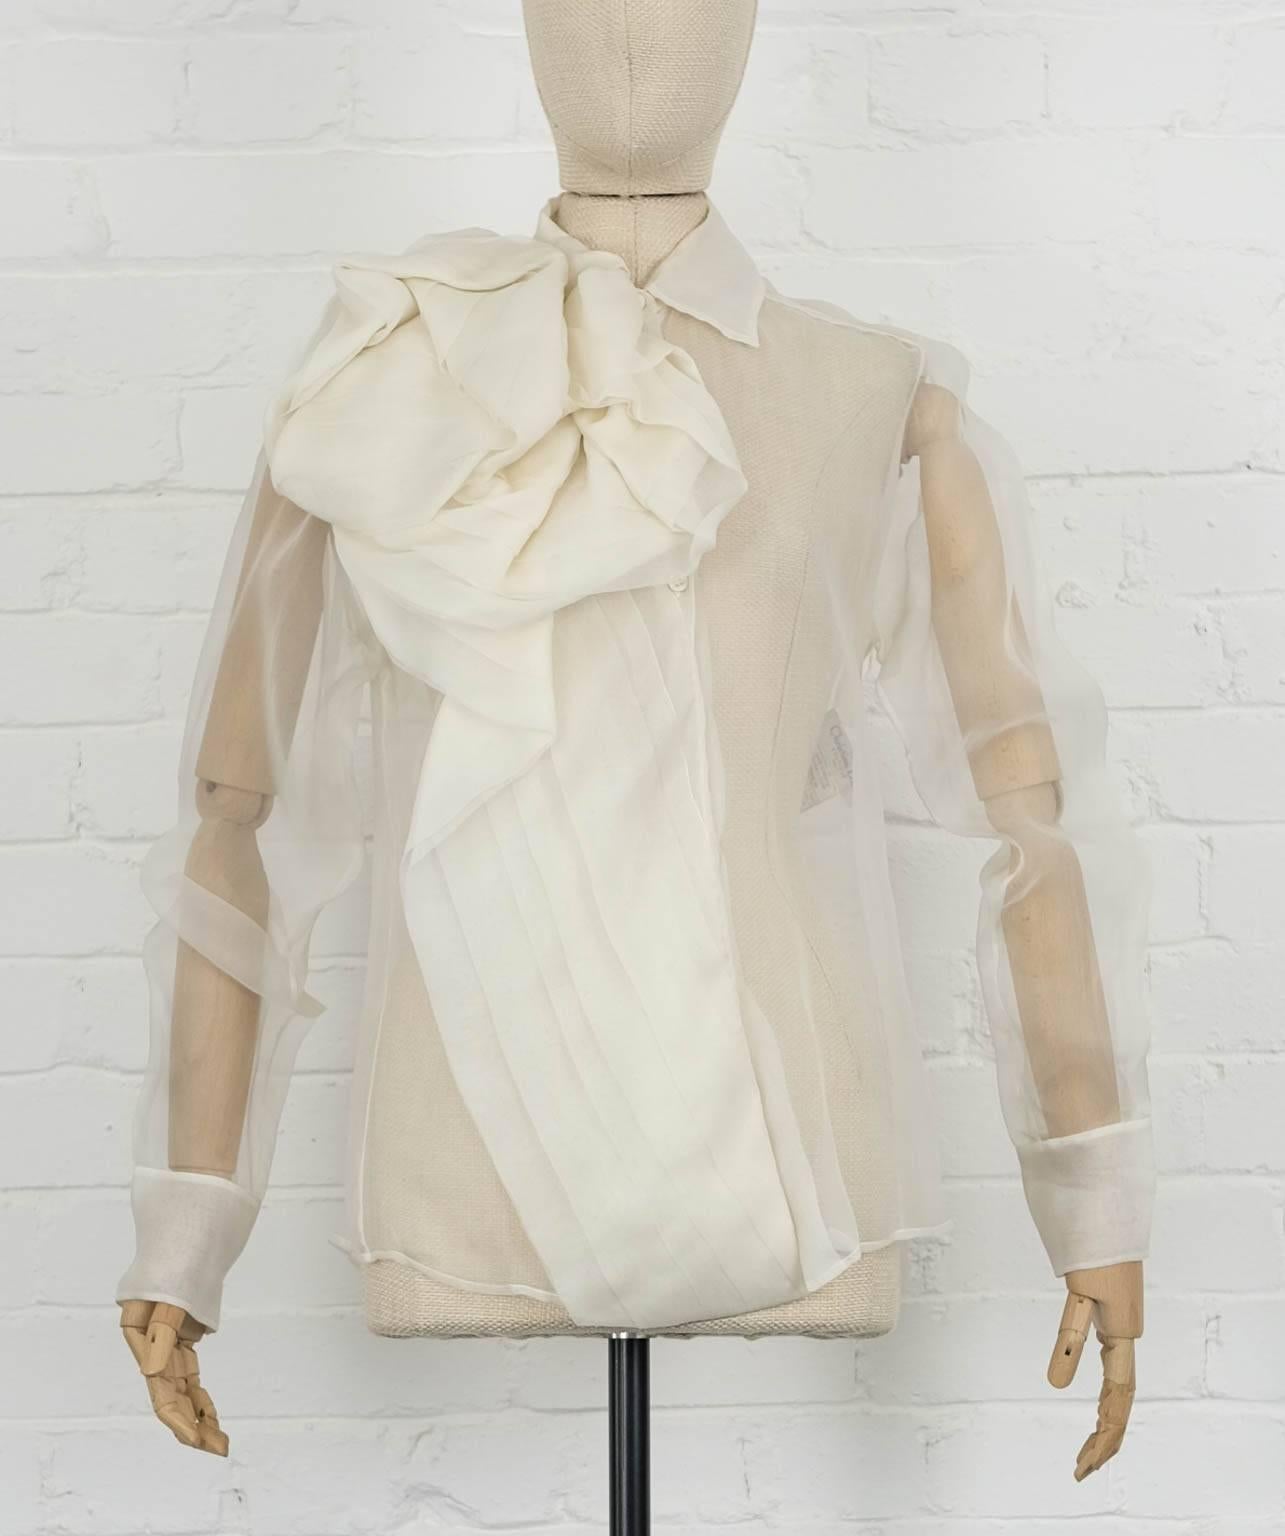 Circa 2004 CHRISTIAN DIOR by John Galliano silk bow sheer blouse unworn In New Condition For Sale In London, GB